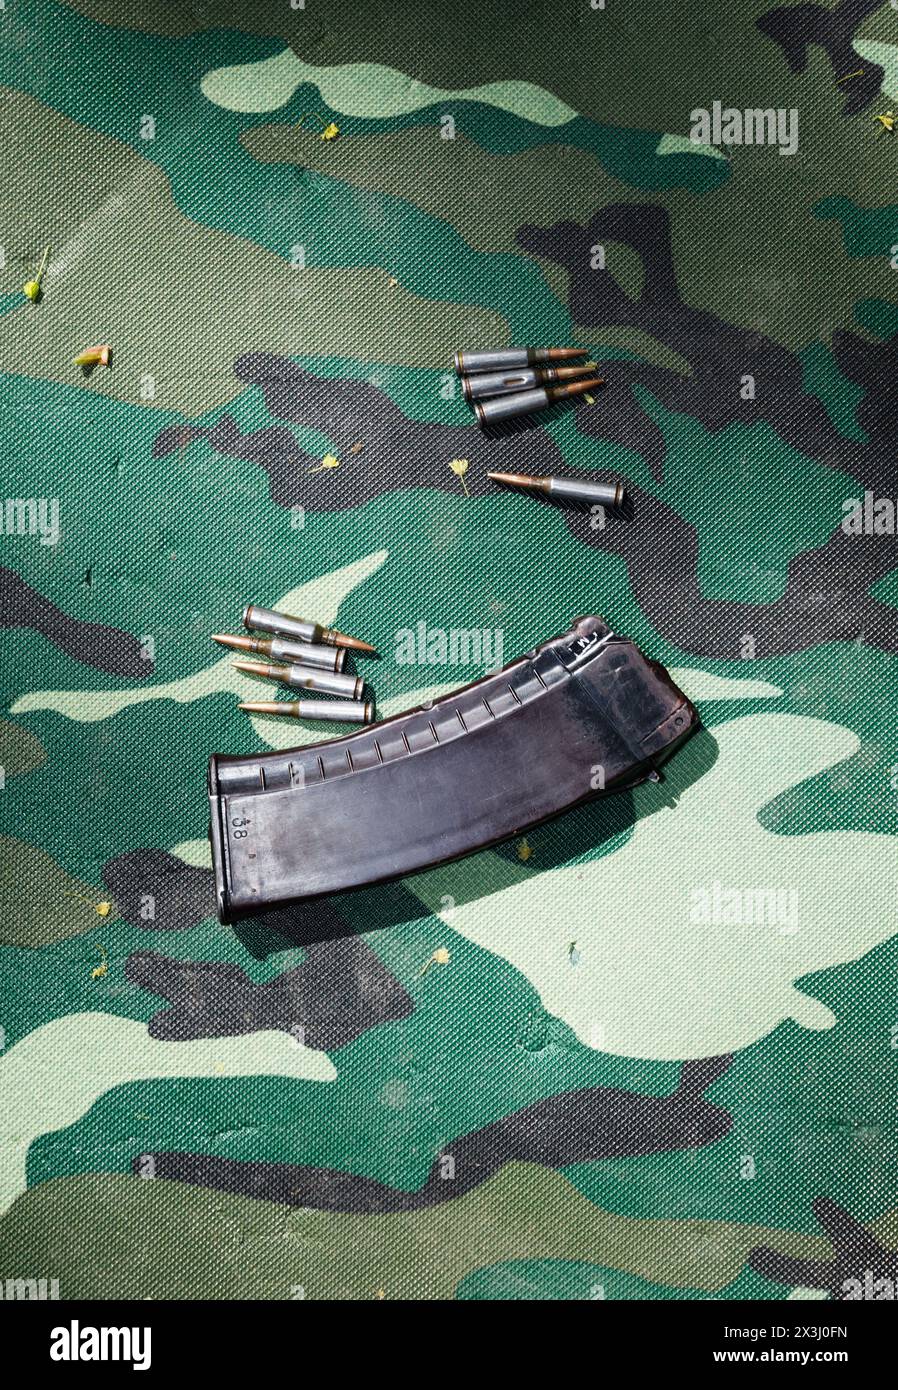 KYIV, UKRAINE - Apr. 13, 2024: Bullets for Kalashnikov assault rifle are seen during the training focused on the use of weapons and combat medical kit for women amid the Russian invasion of Ukraine Stock Photo